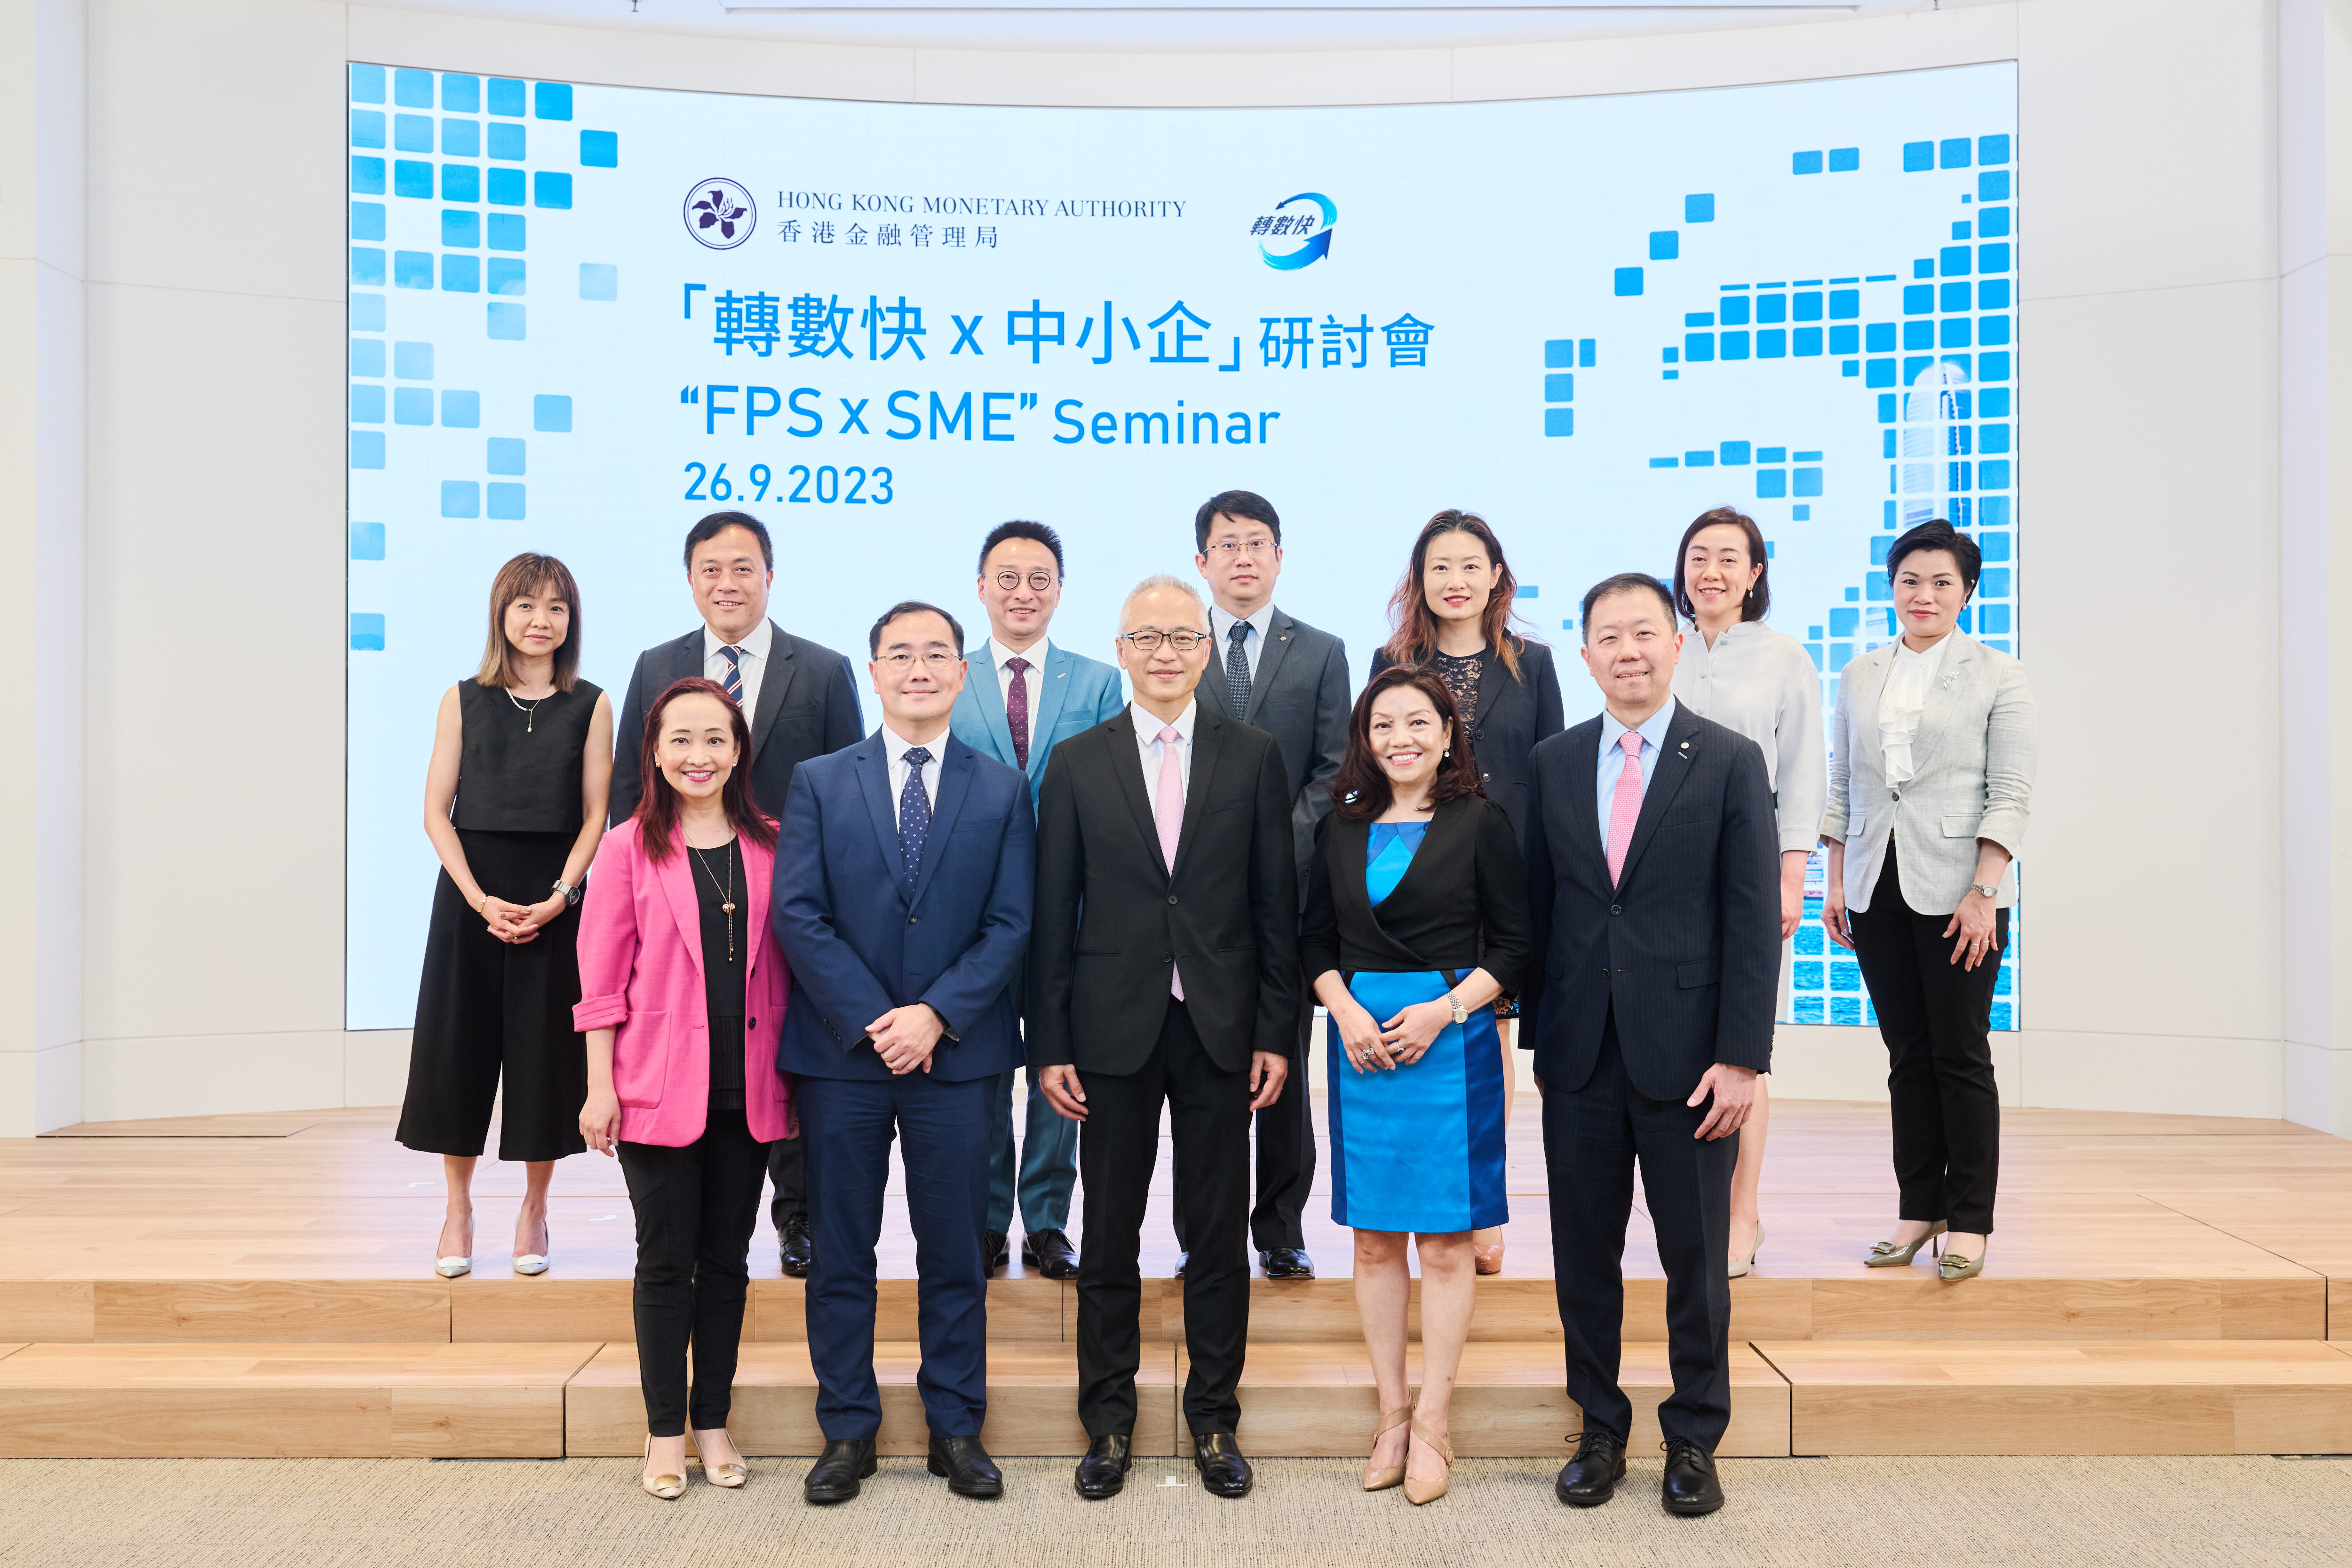 Howard Lee, Deputy Chief Executive of the Hong Kong Monetary Authority (HKMA) (third from left, front row); Mr Colin Pou, Executive Director (Financial Infrastructure) of the HKMA (second from left, front row); and Ms Haster Tang, the Chief Executive Officer of the Hong Kong Interbank Clearing Limited (second from right, front row), together with representatives from banks and Stored Value Facility operators attend the seminar.